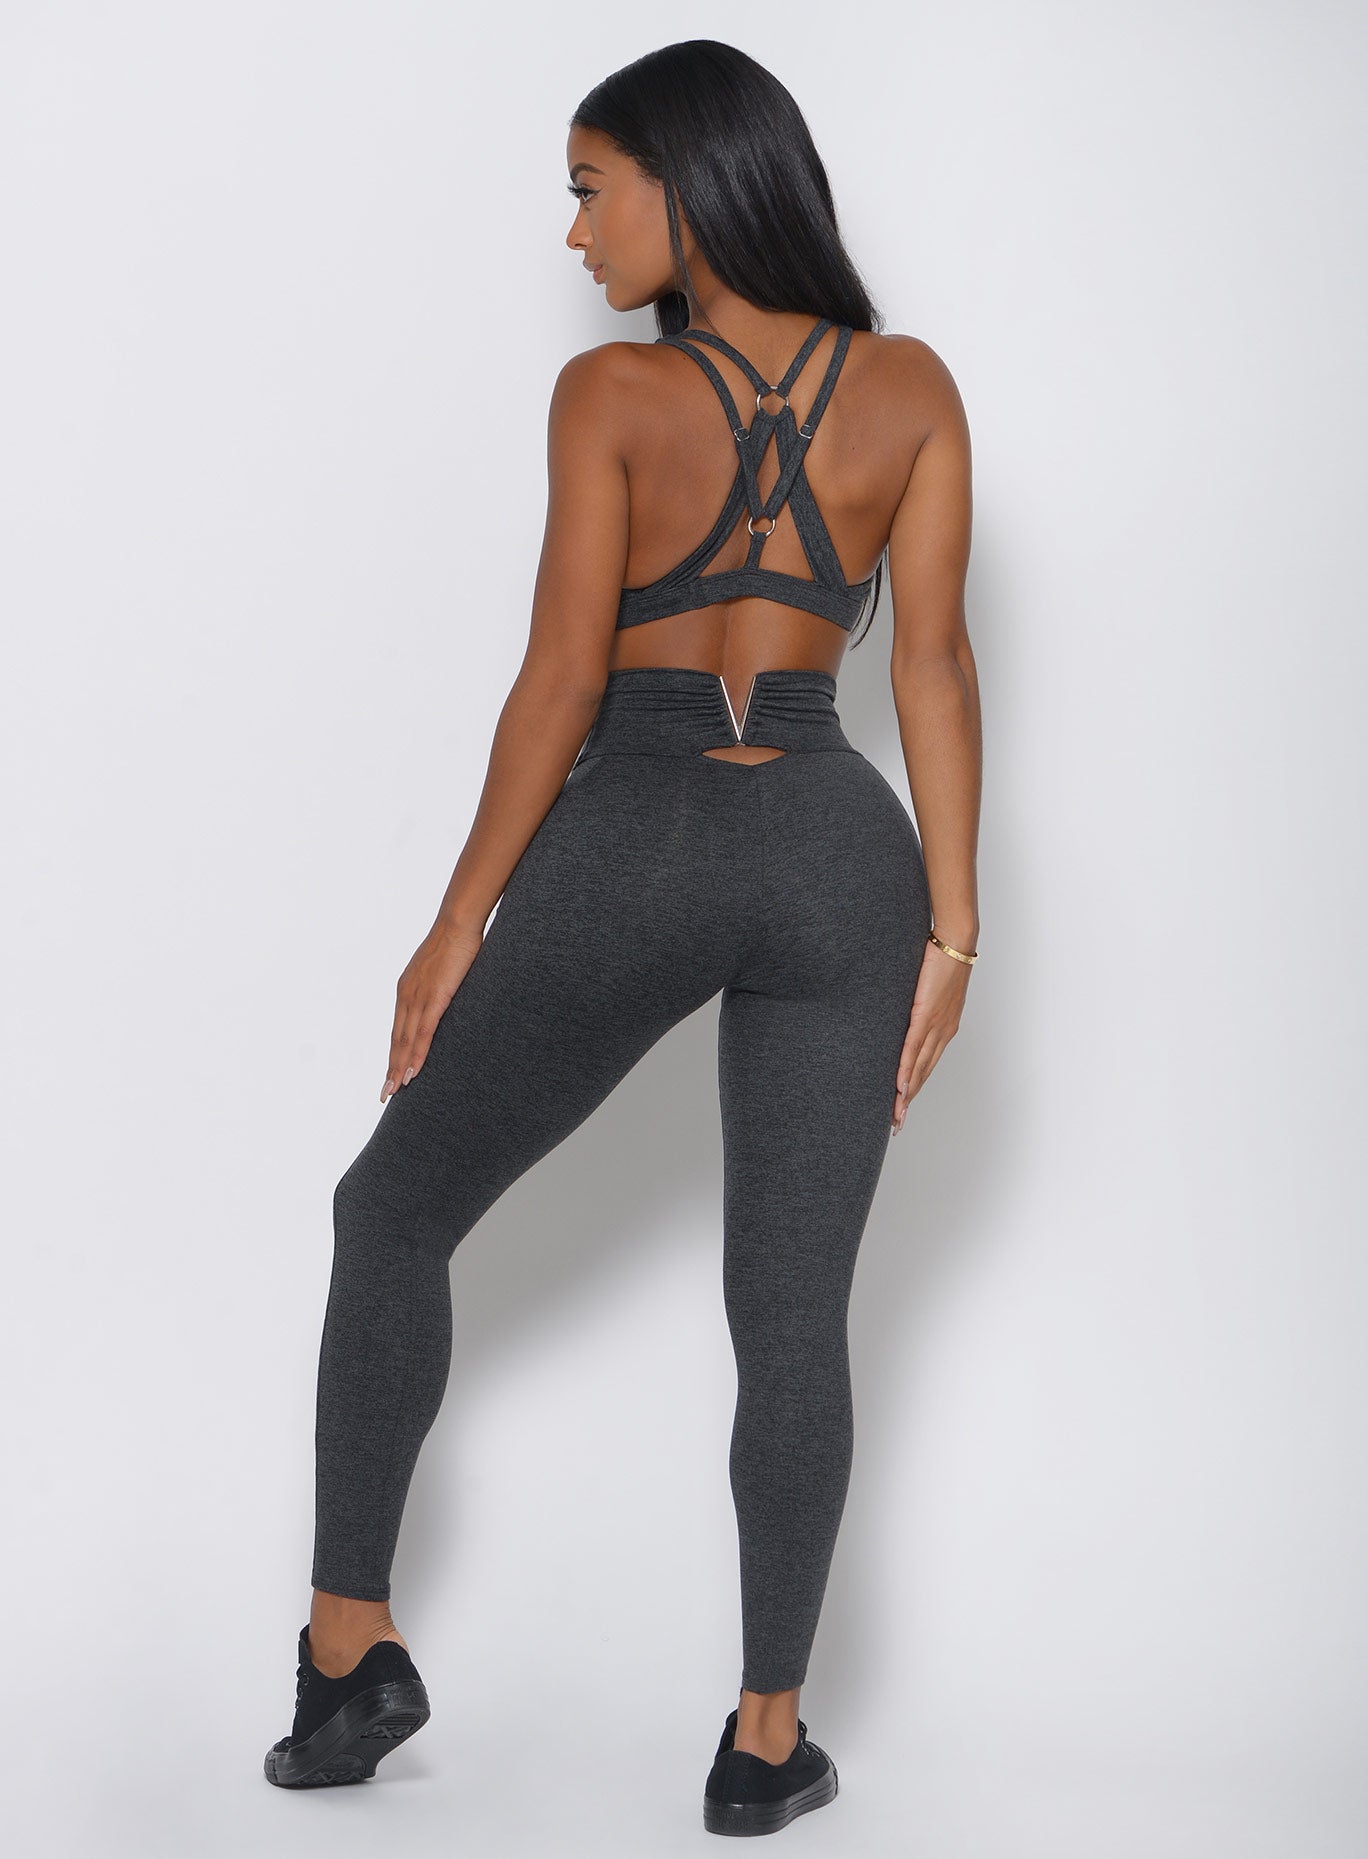 Back view of the model in a high waist gray leggings with a V back design and a matching sports bra 